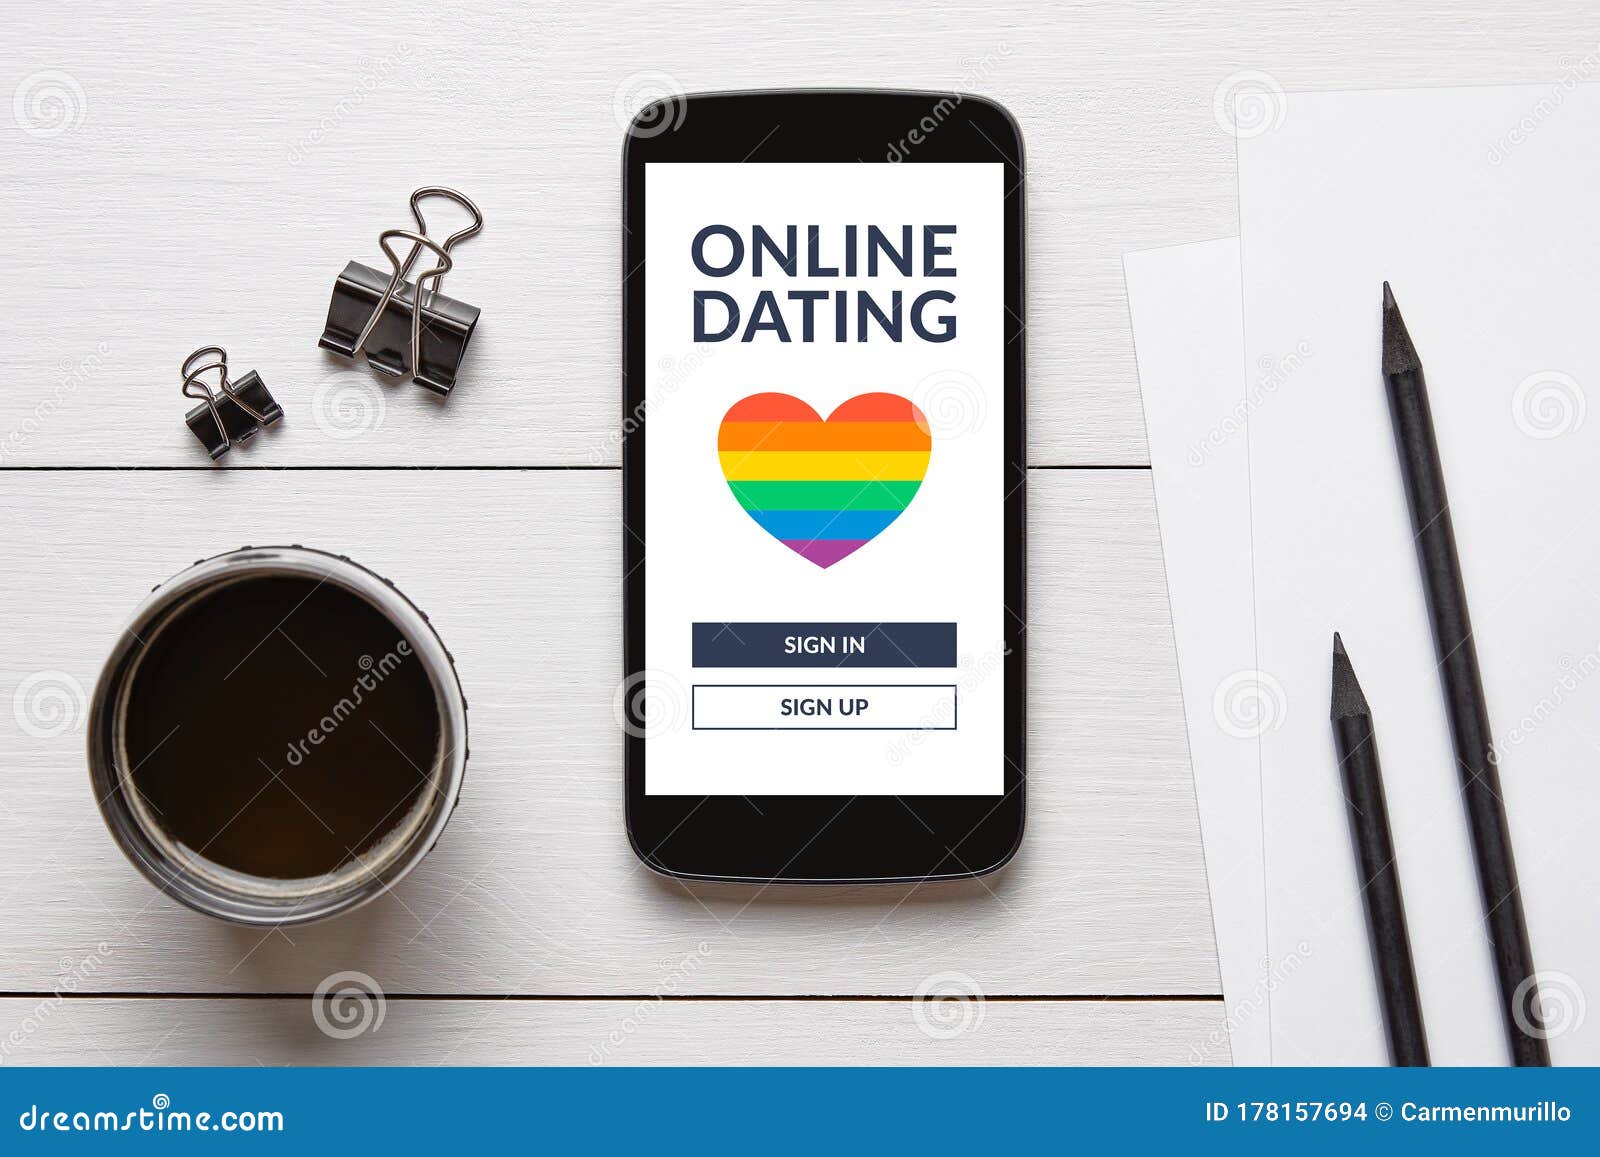 dating online scams